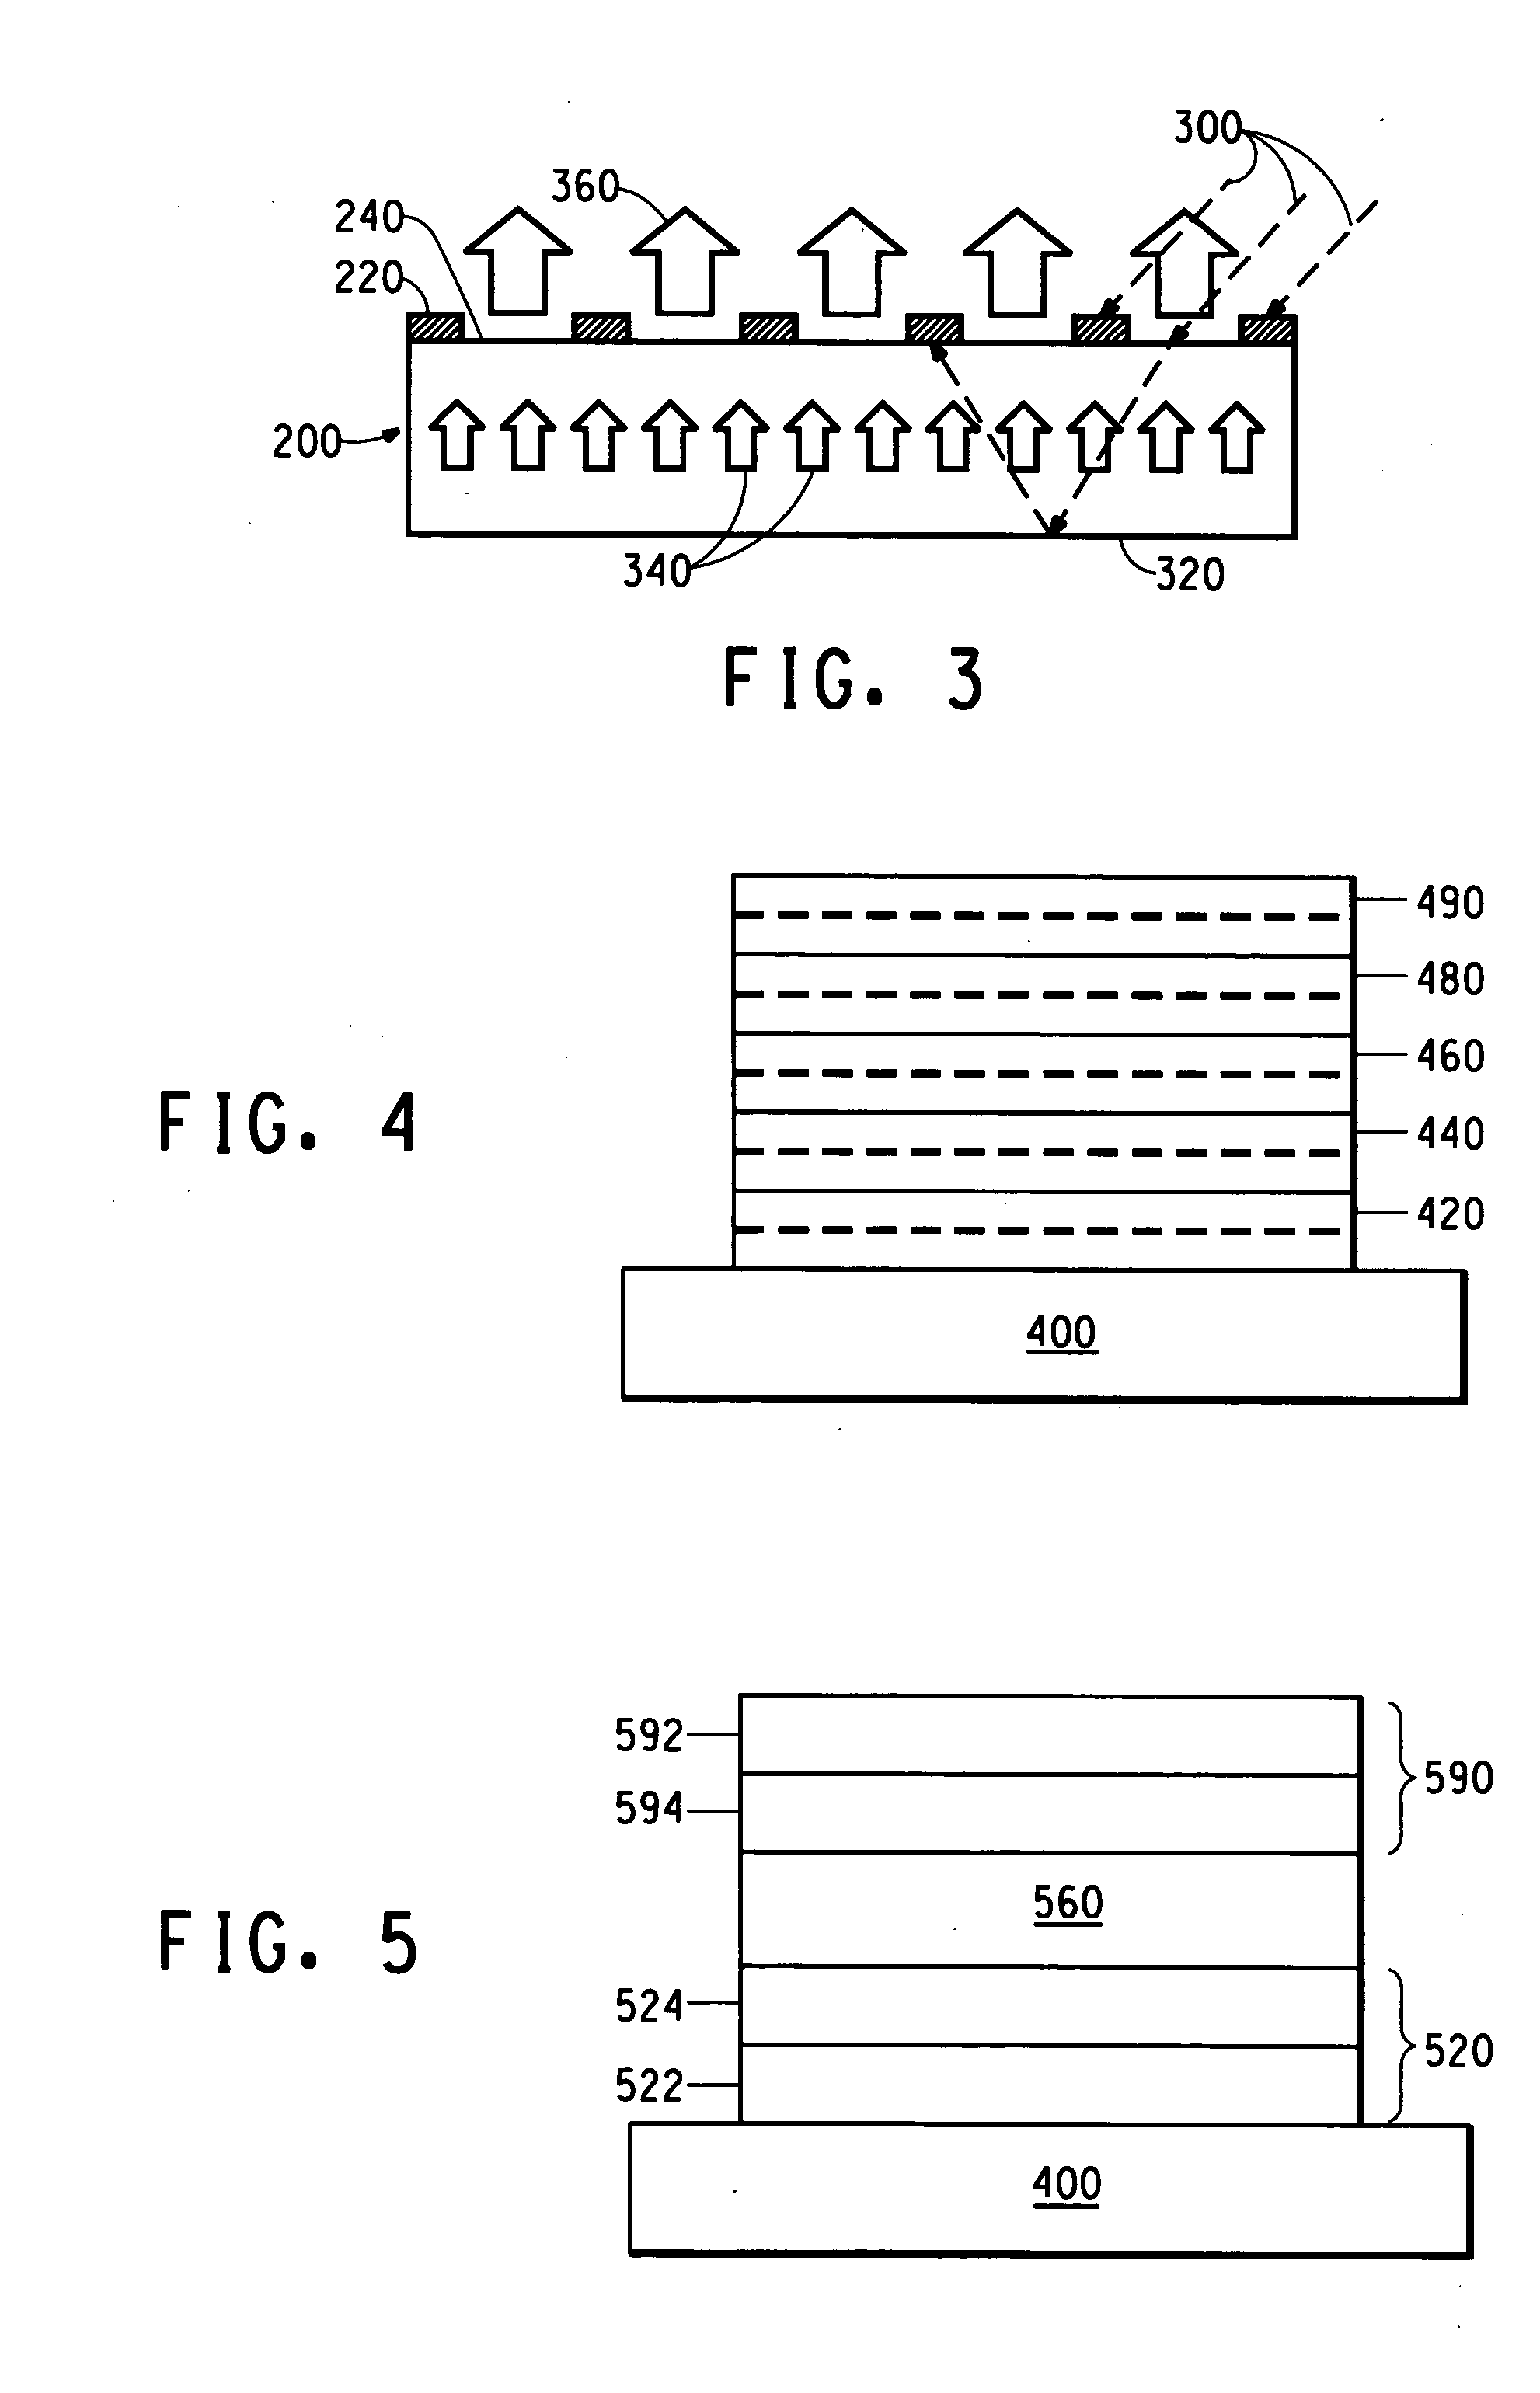 Array comprising organic electronic devices with a black lattice and process for forming the same